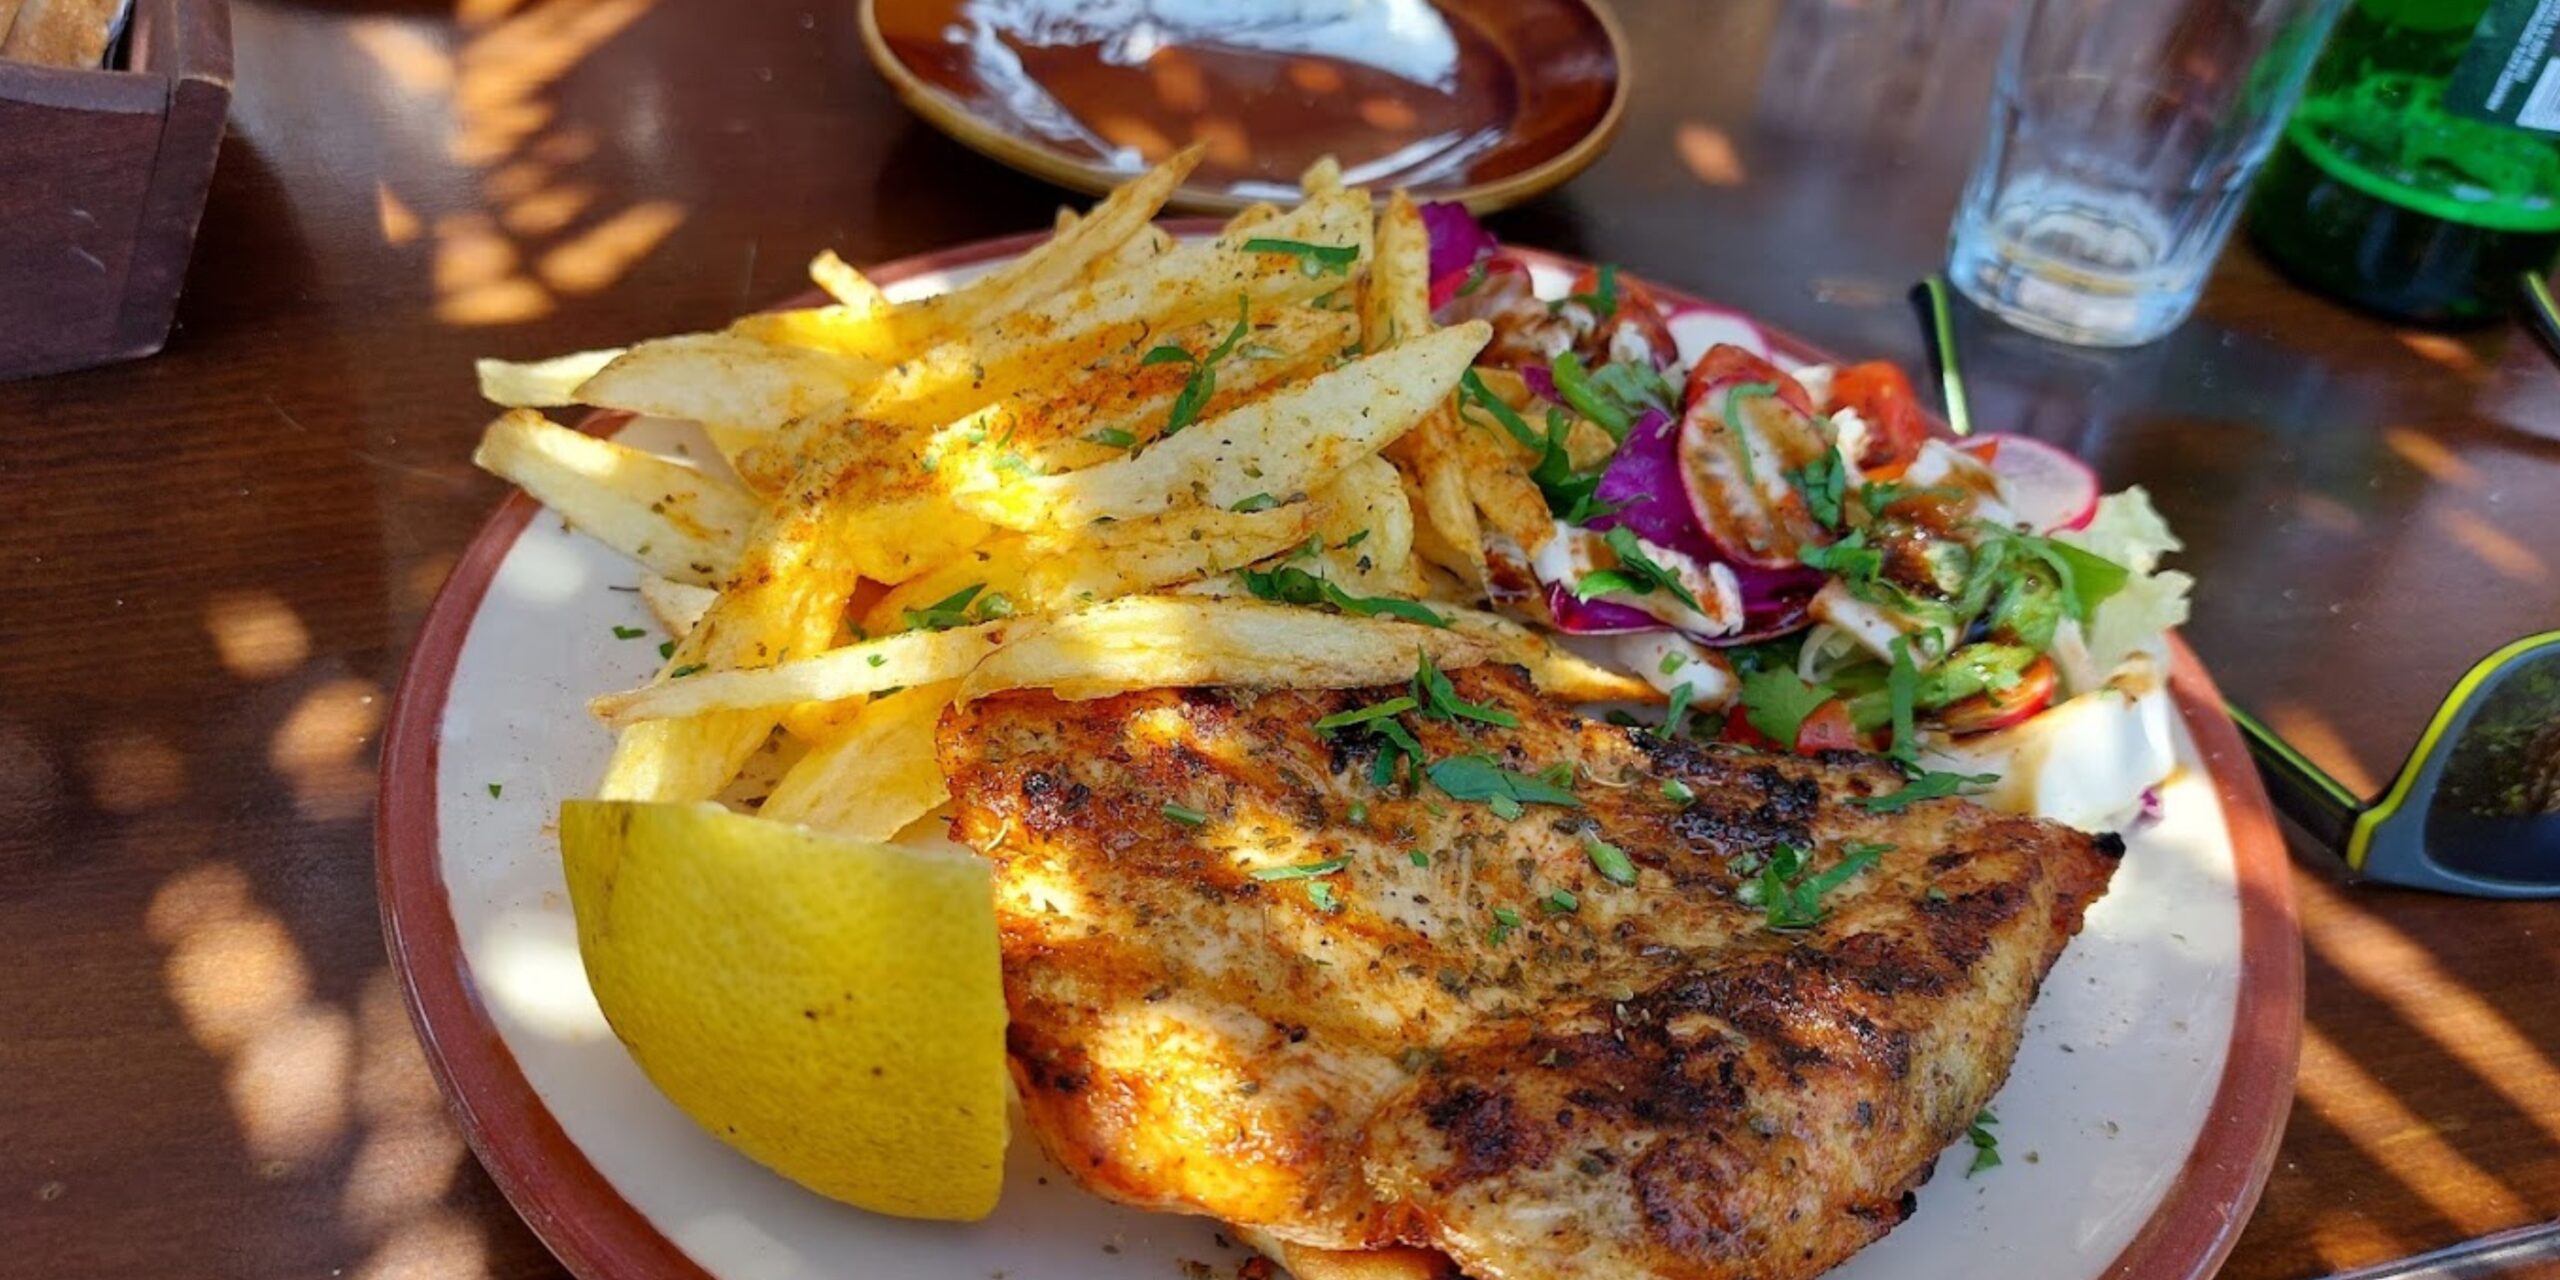 Plate of grilled fish with lemon, fries, and a side salad on a wooden table.